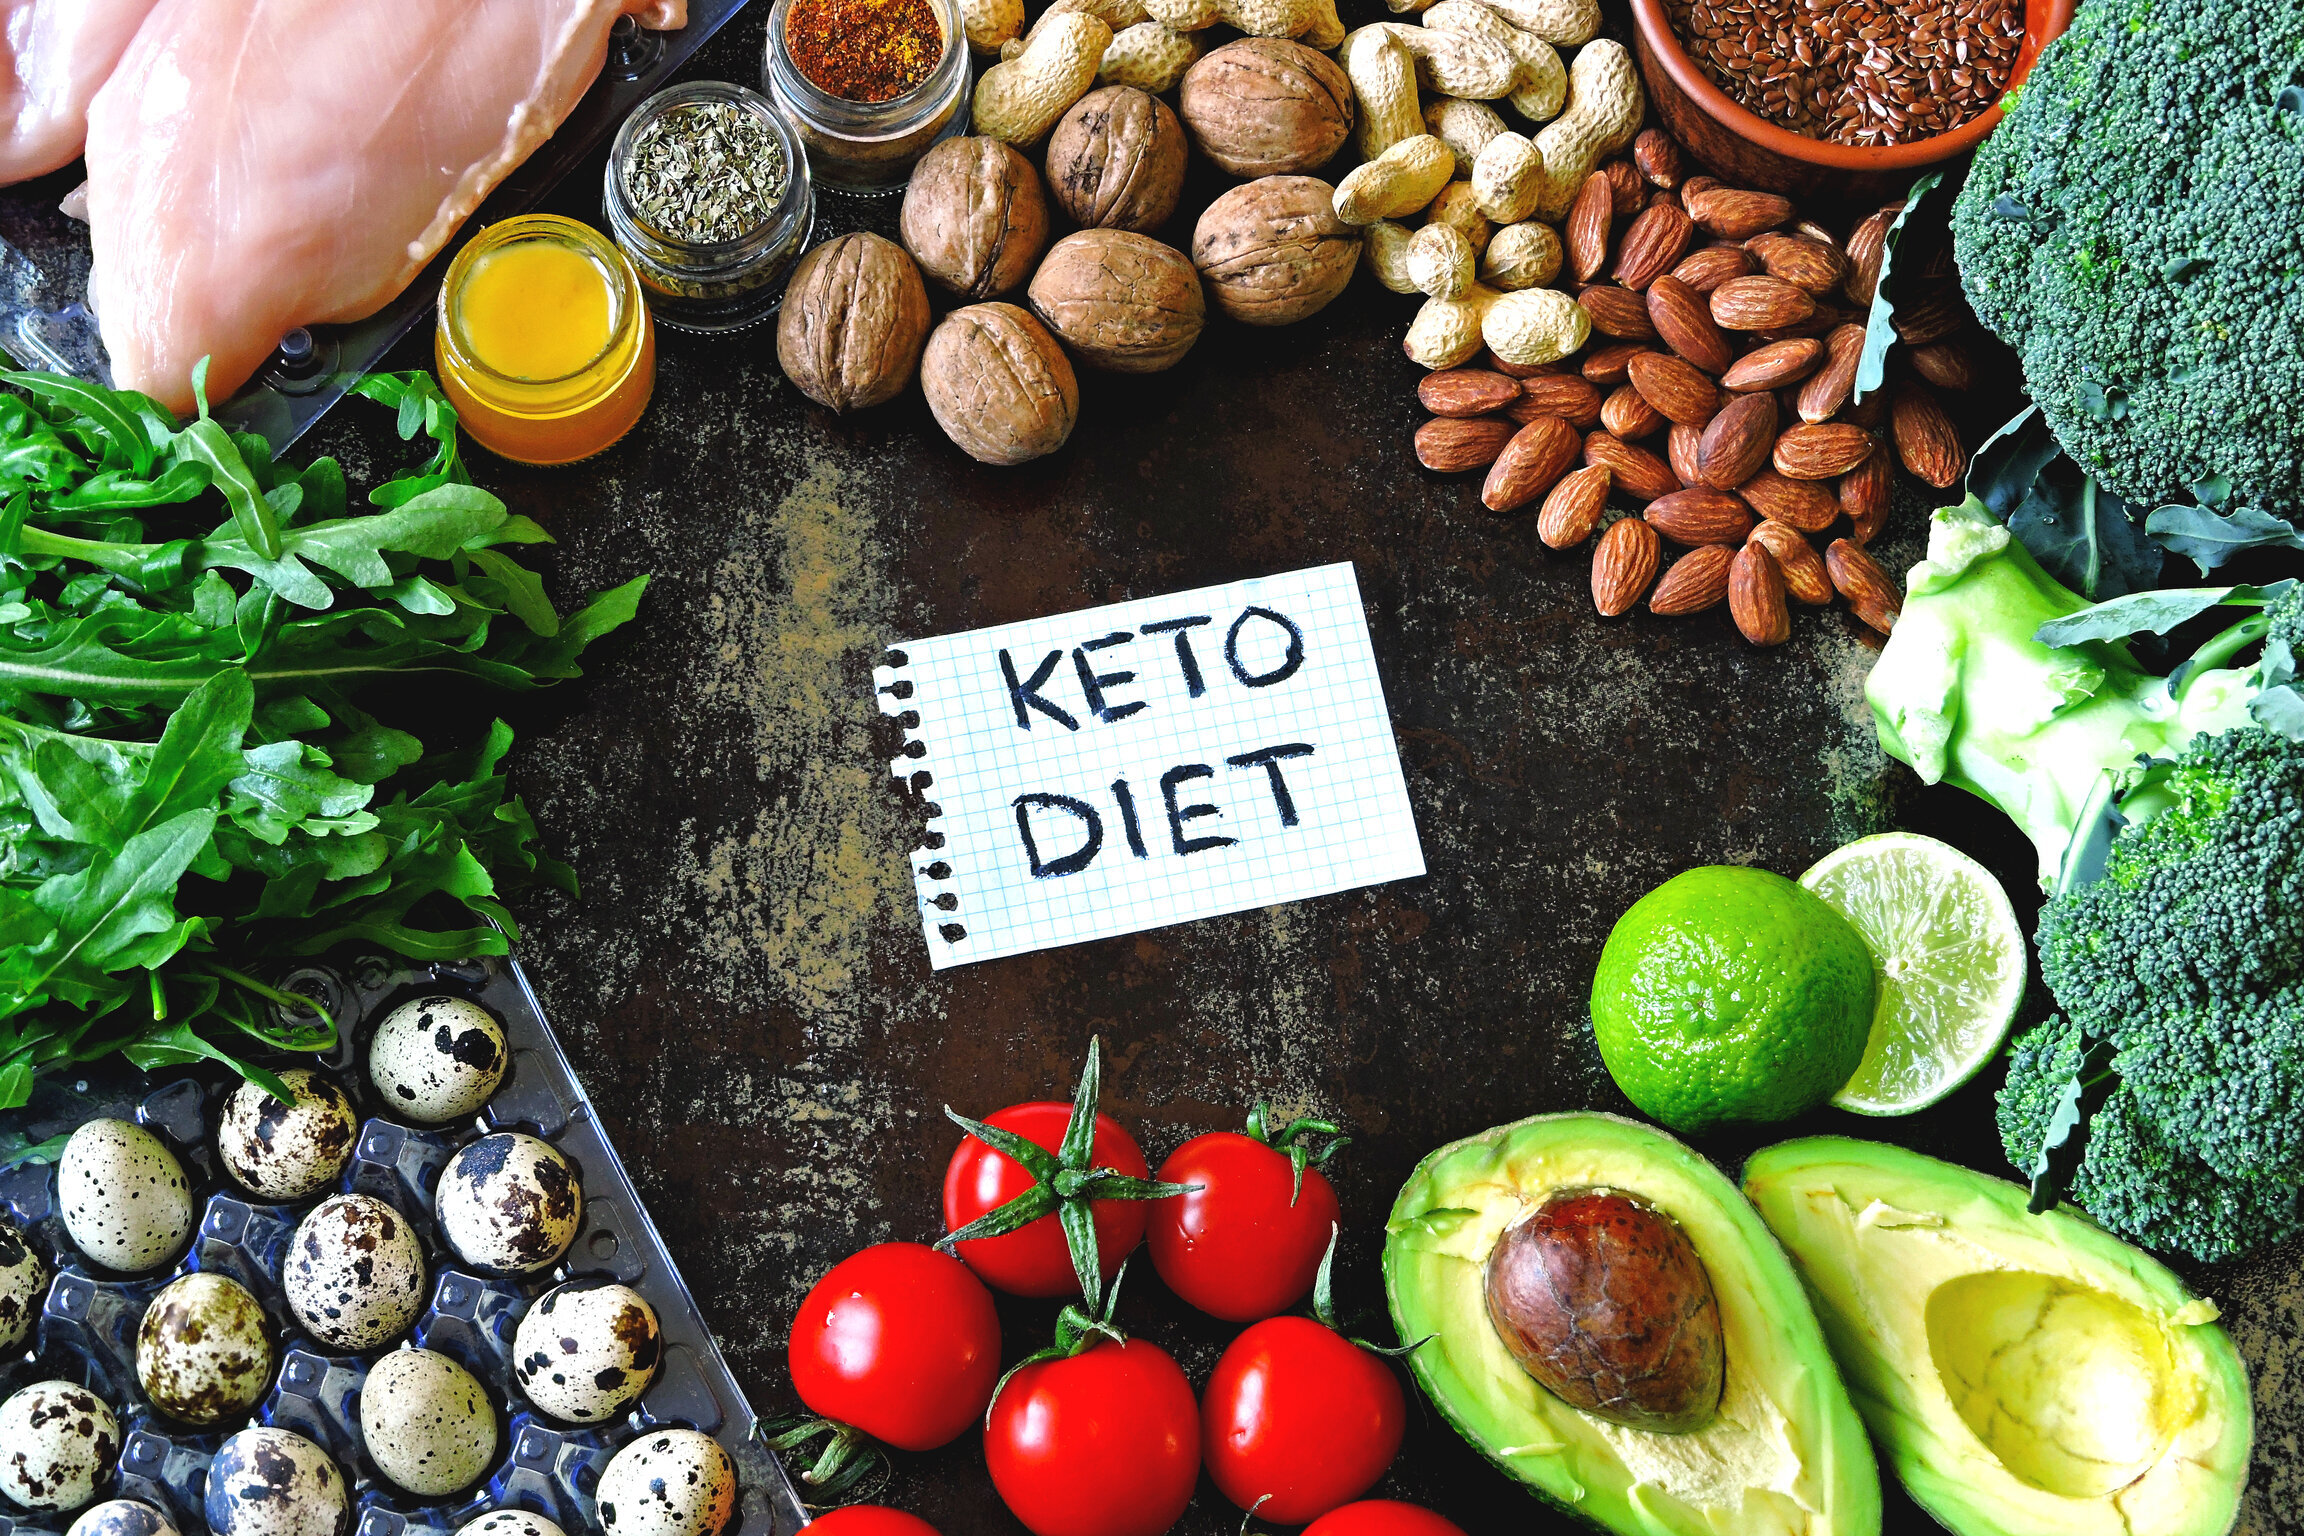 You may lose weight on a low-carb ketogenic diet, but aside from targeted conditions is this diet a good one for long-term health?